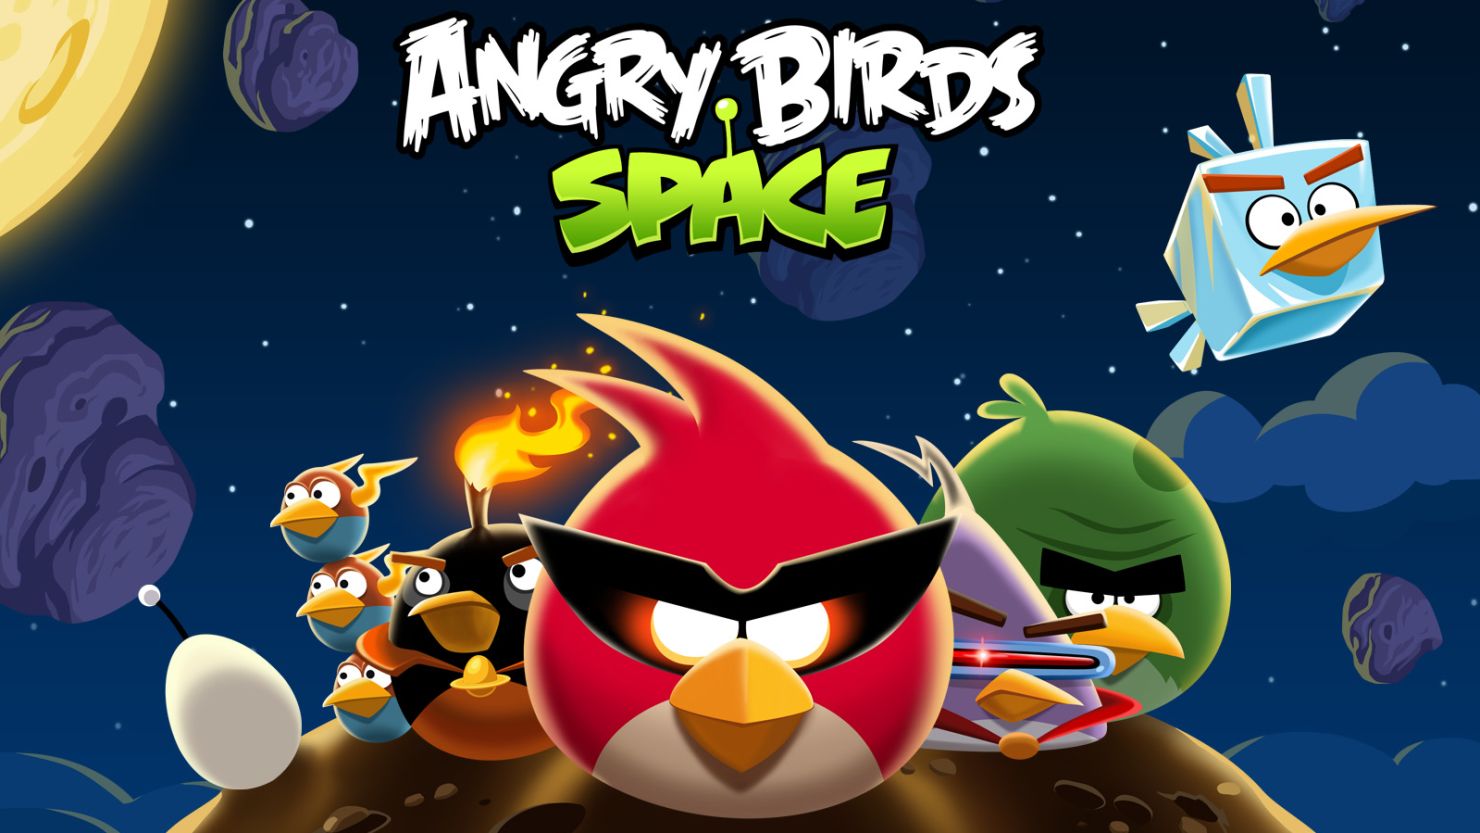 Security analysts have found fake versions of "Angry Birds: Space" that contain potentially harmful malware.